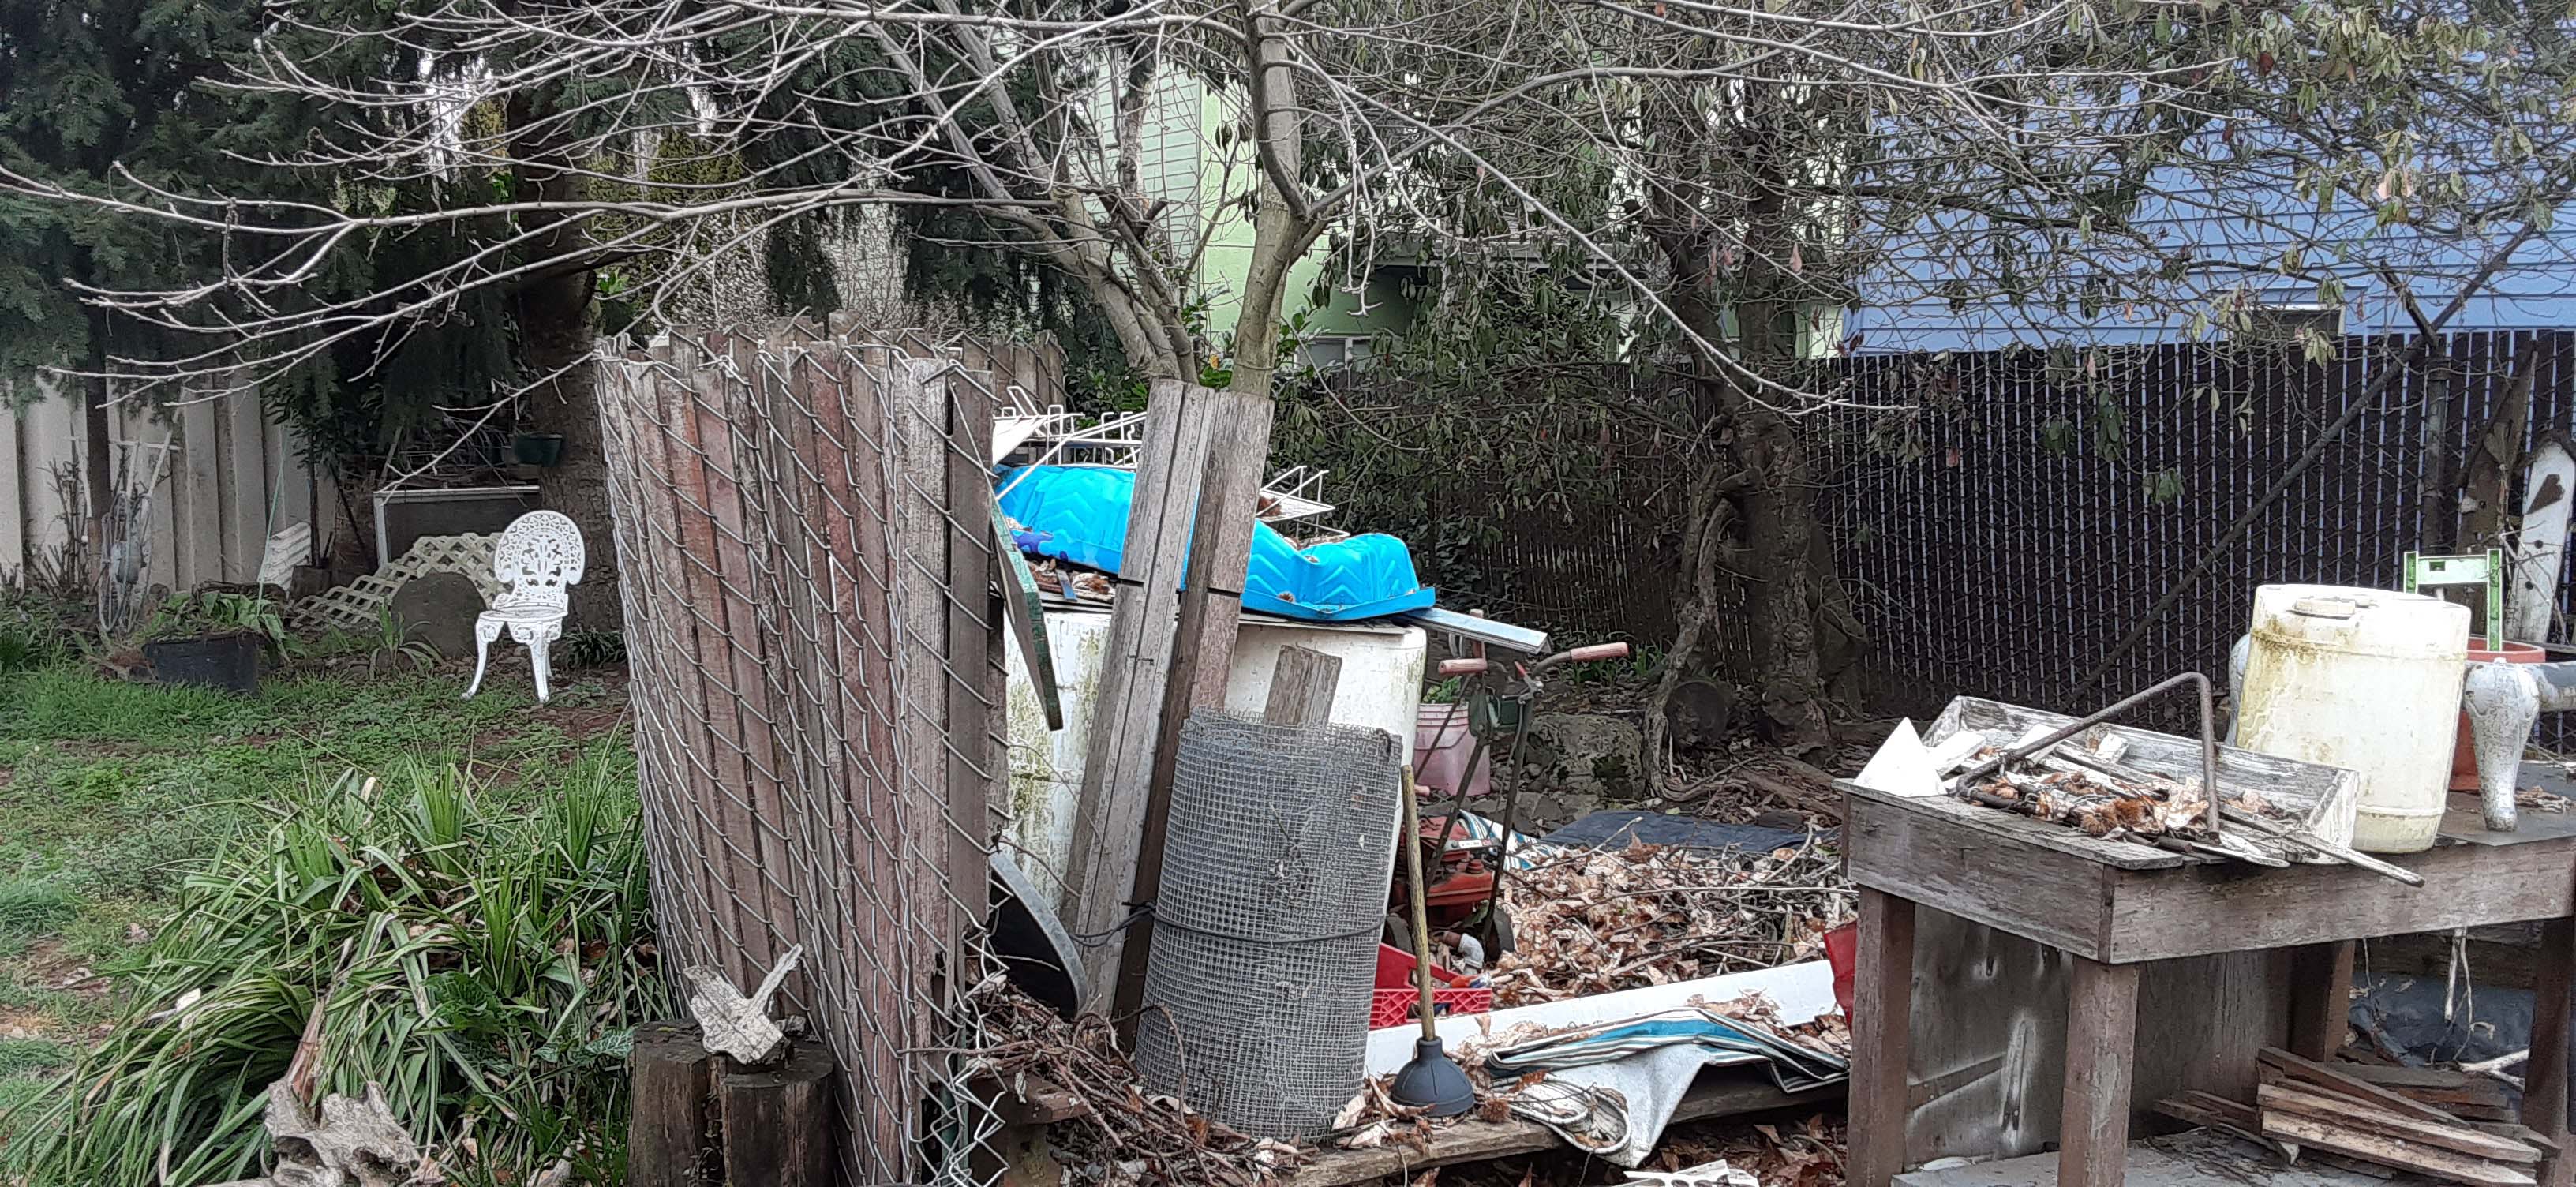 Trash and debris piled up in a backyard area